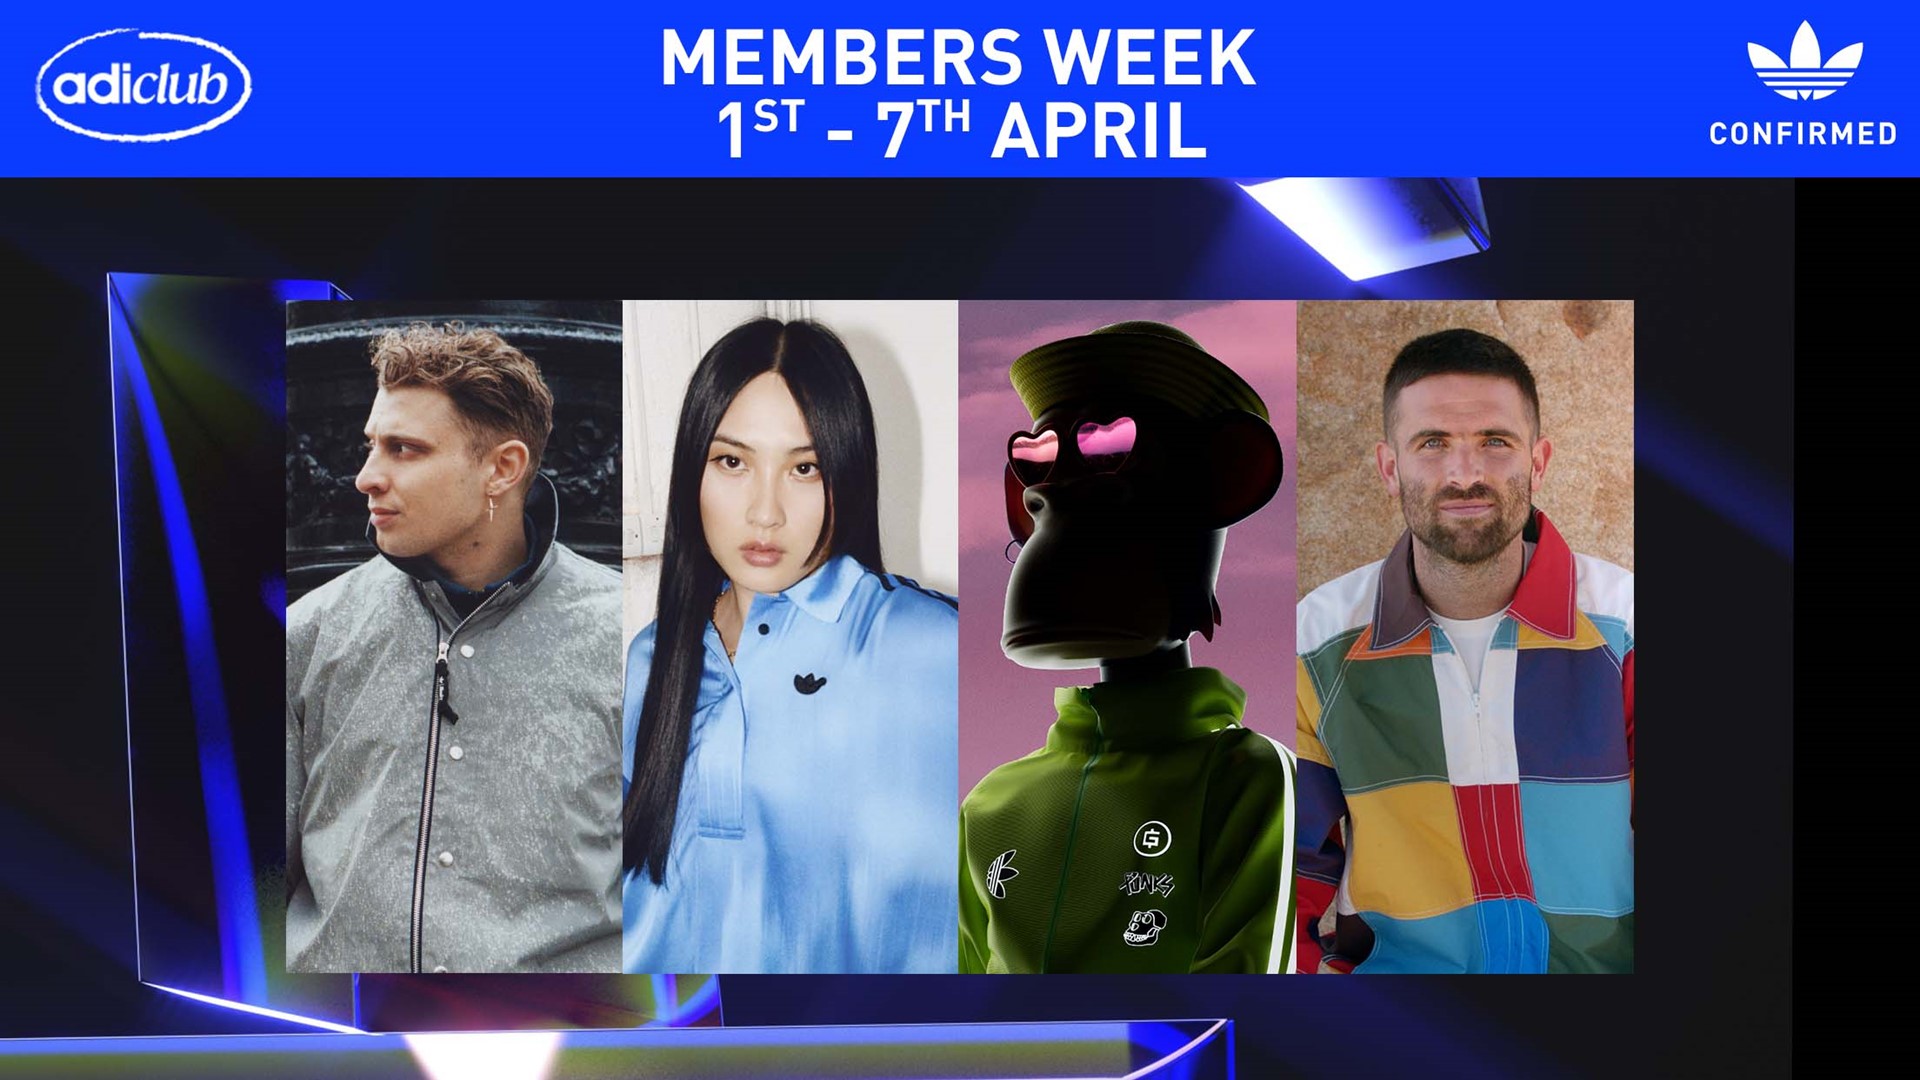 onderbreken Geld rubber getrouwd adidas Celebrates its Members With a Week of High-Profile Drops and  Activations on CONFIRMED